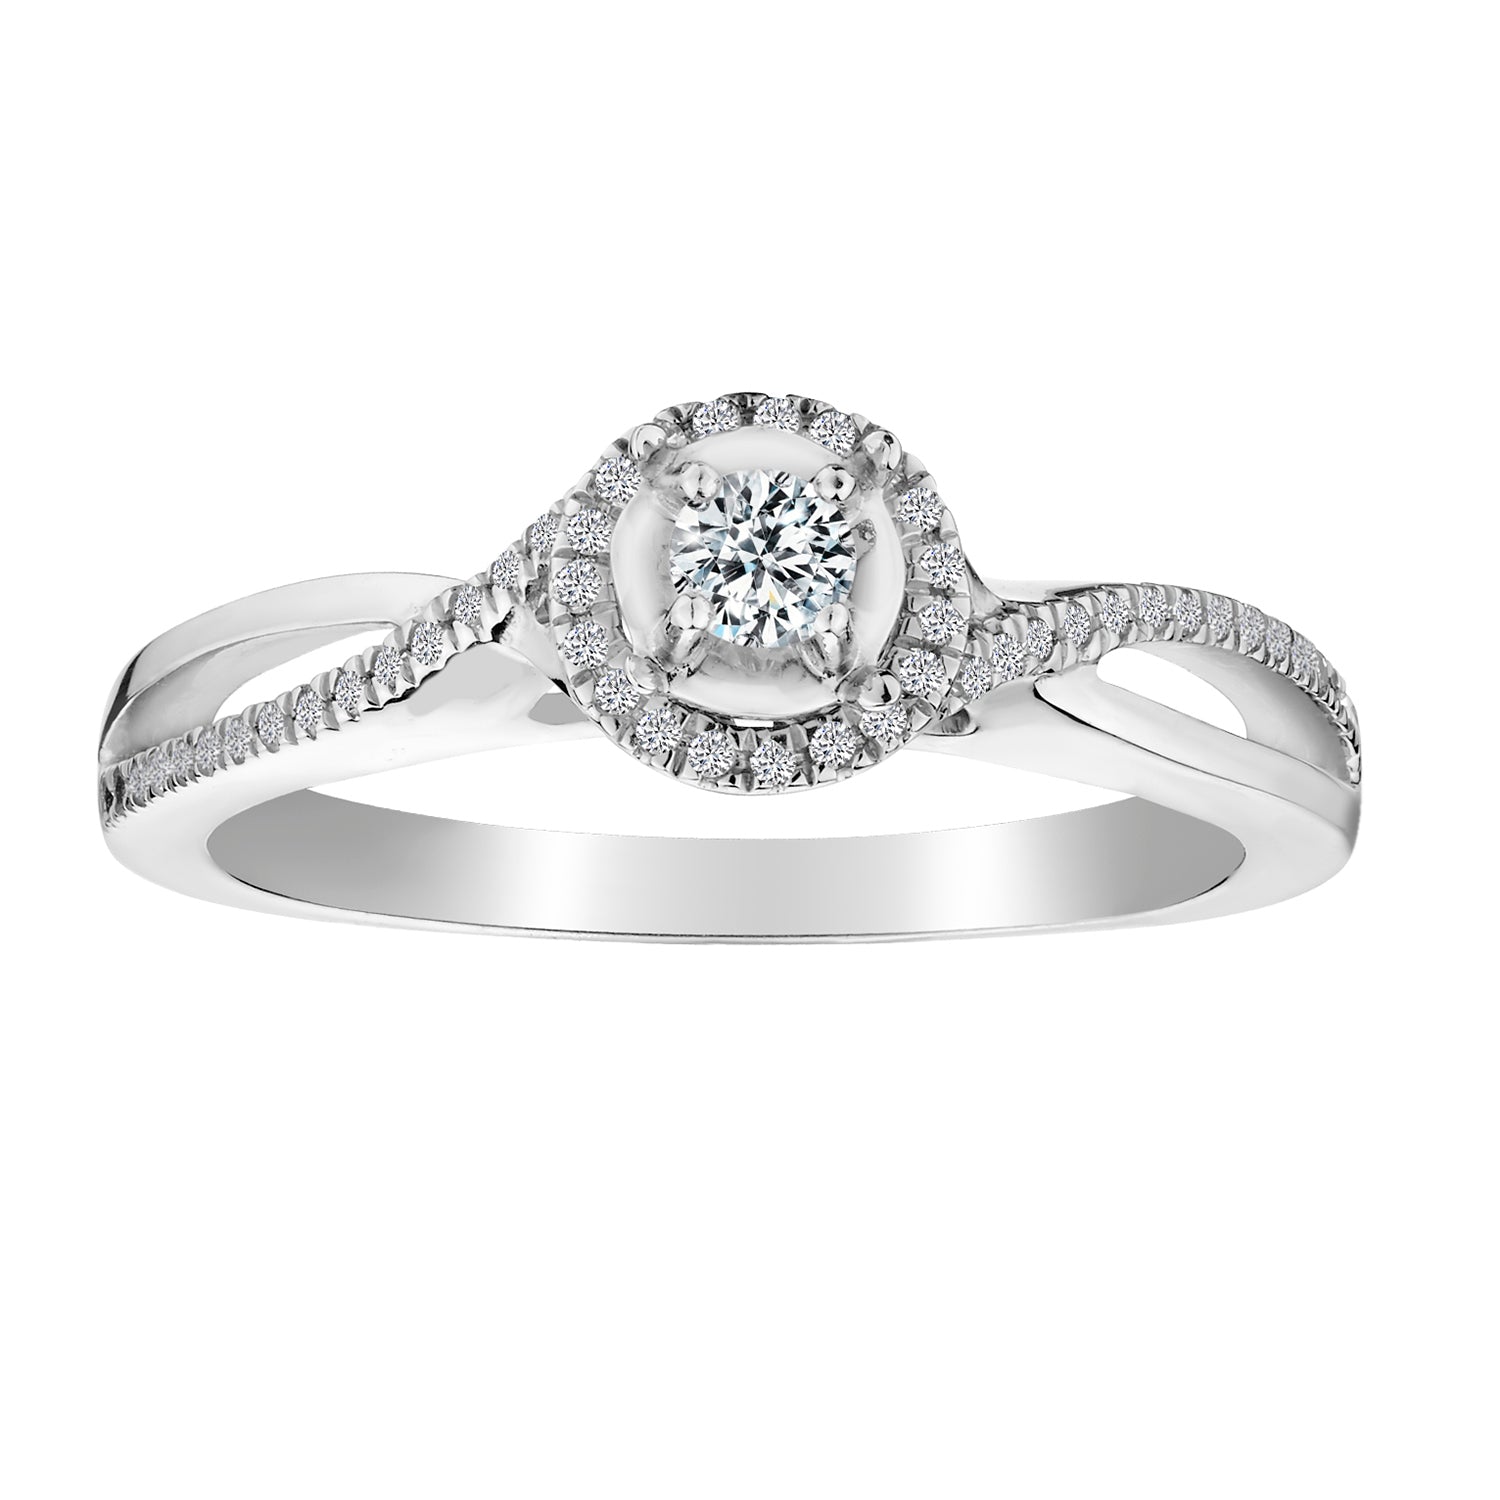 .20 Carat Canadian Diamond "Dream" Engagement Ring,  10kt White Gold. Griffin Jewellery Designs